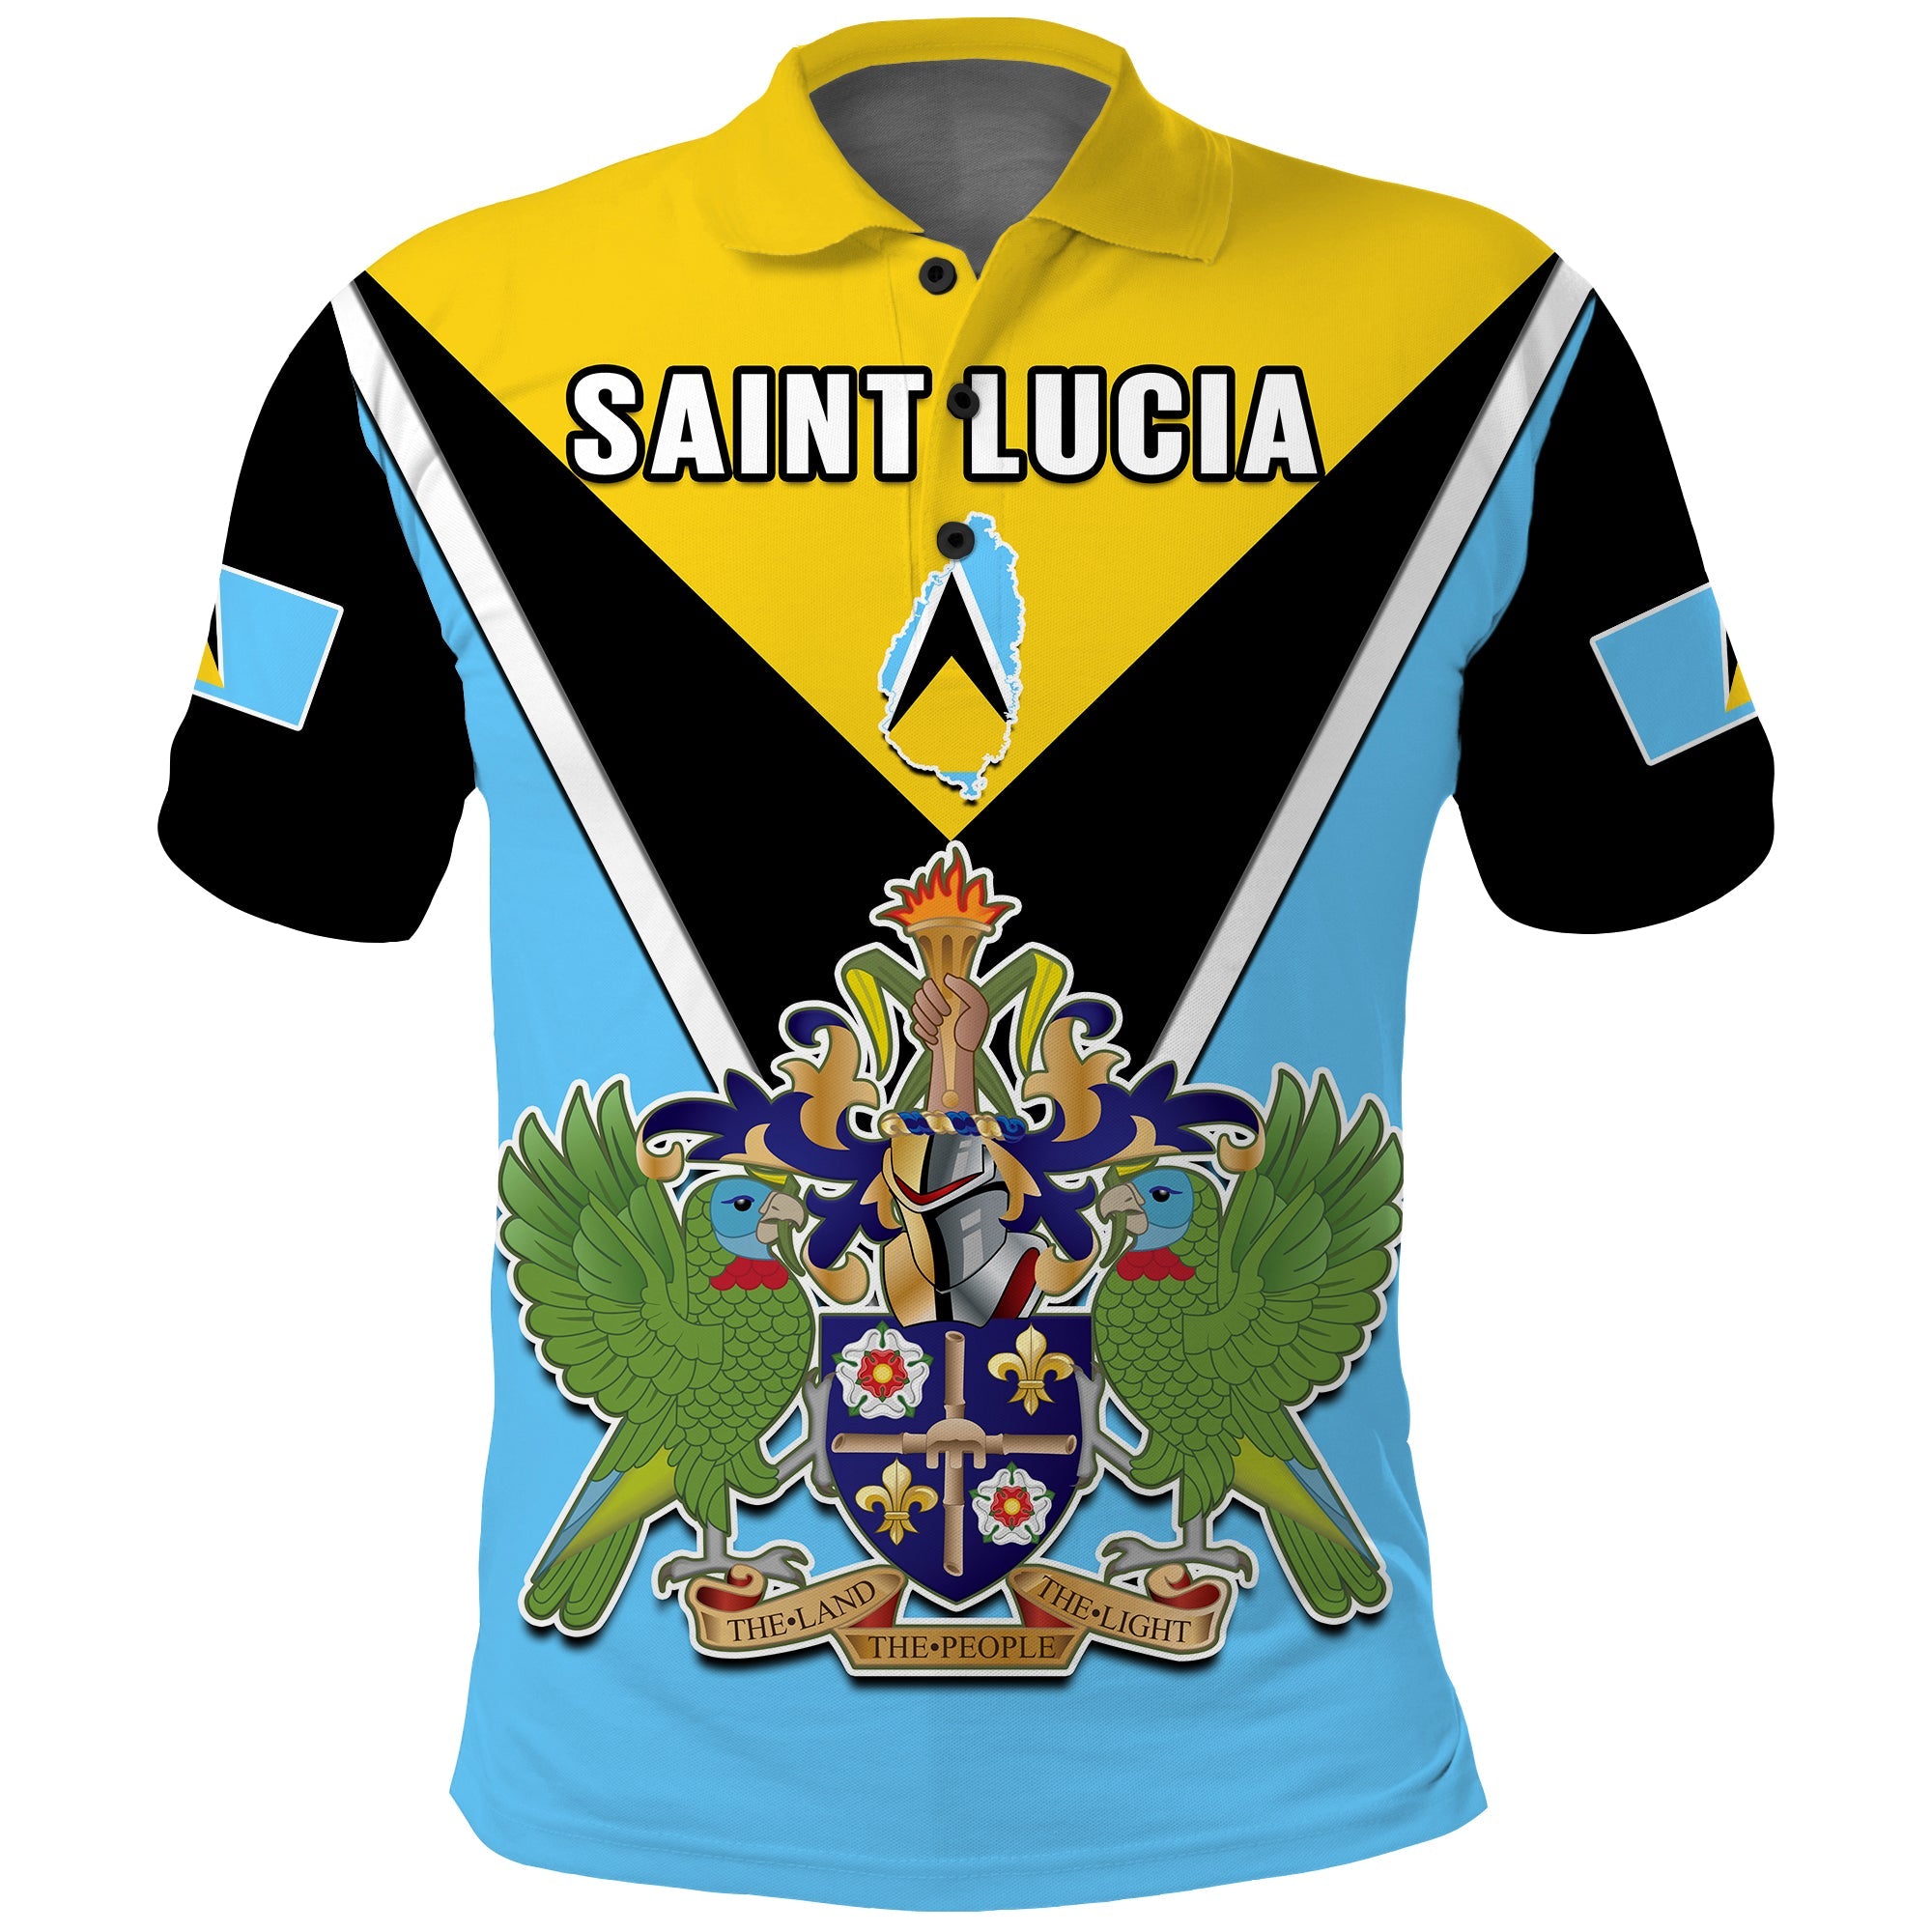 saint-lucia-polo-shirt-happy-44-years-of-independence